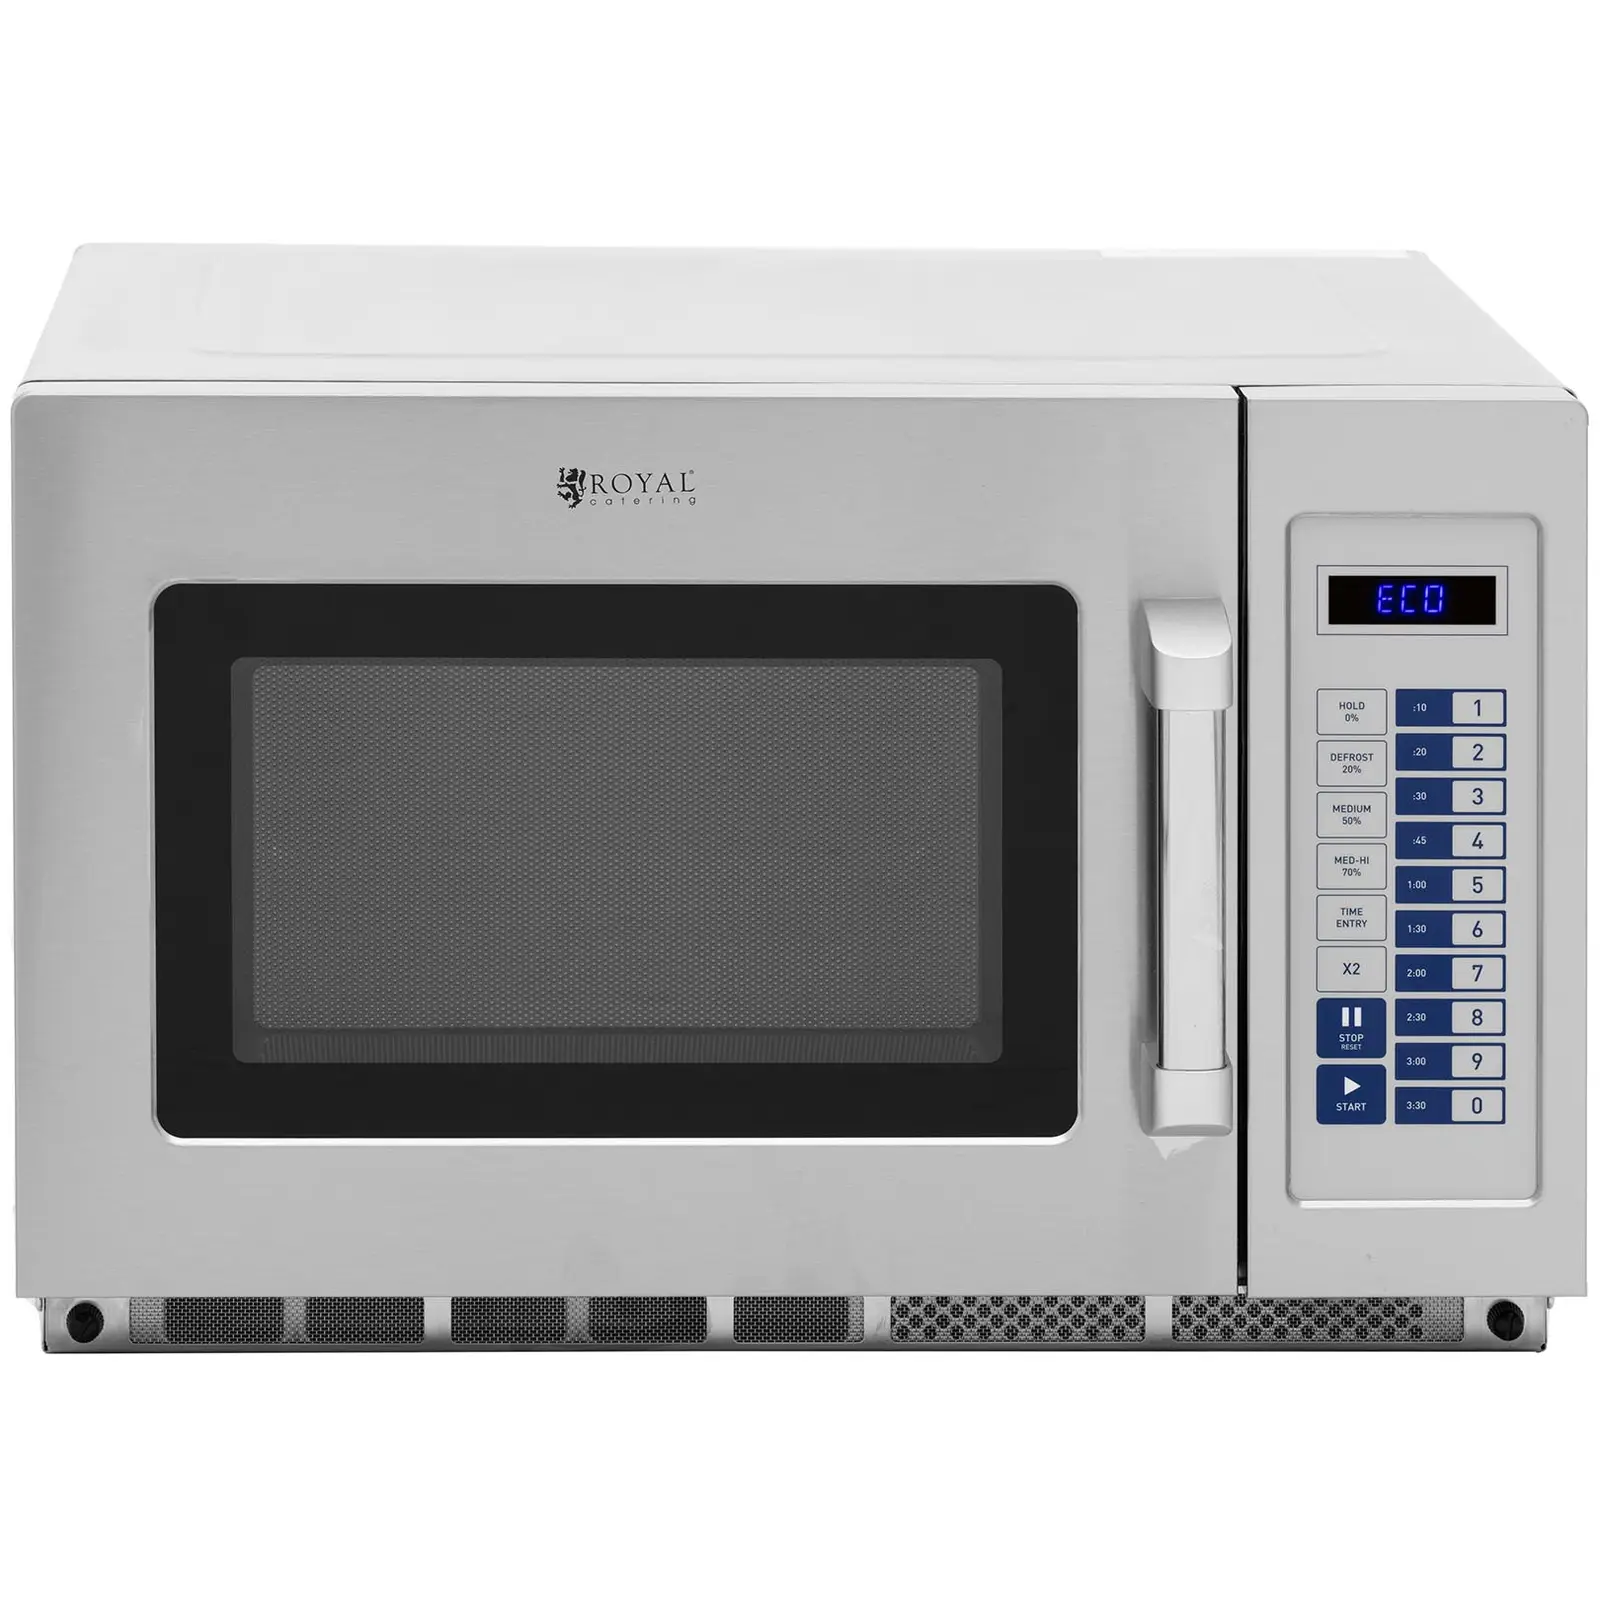 Forno microondas - catering - 3200 W - 34 l - Royal Catering